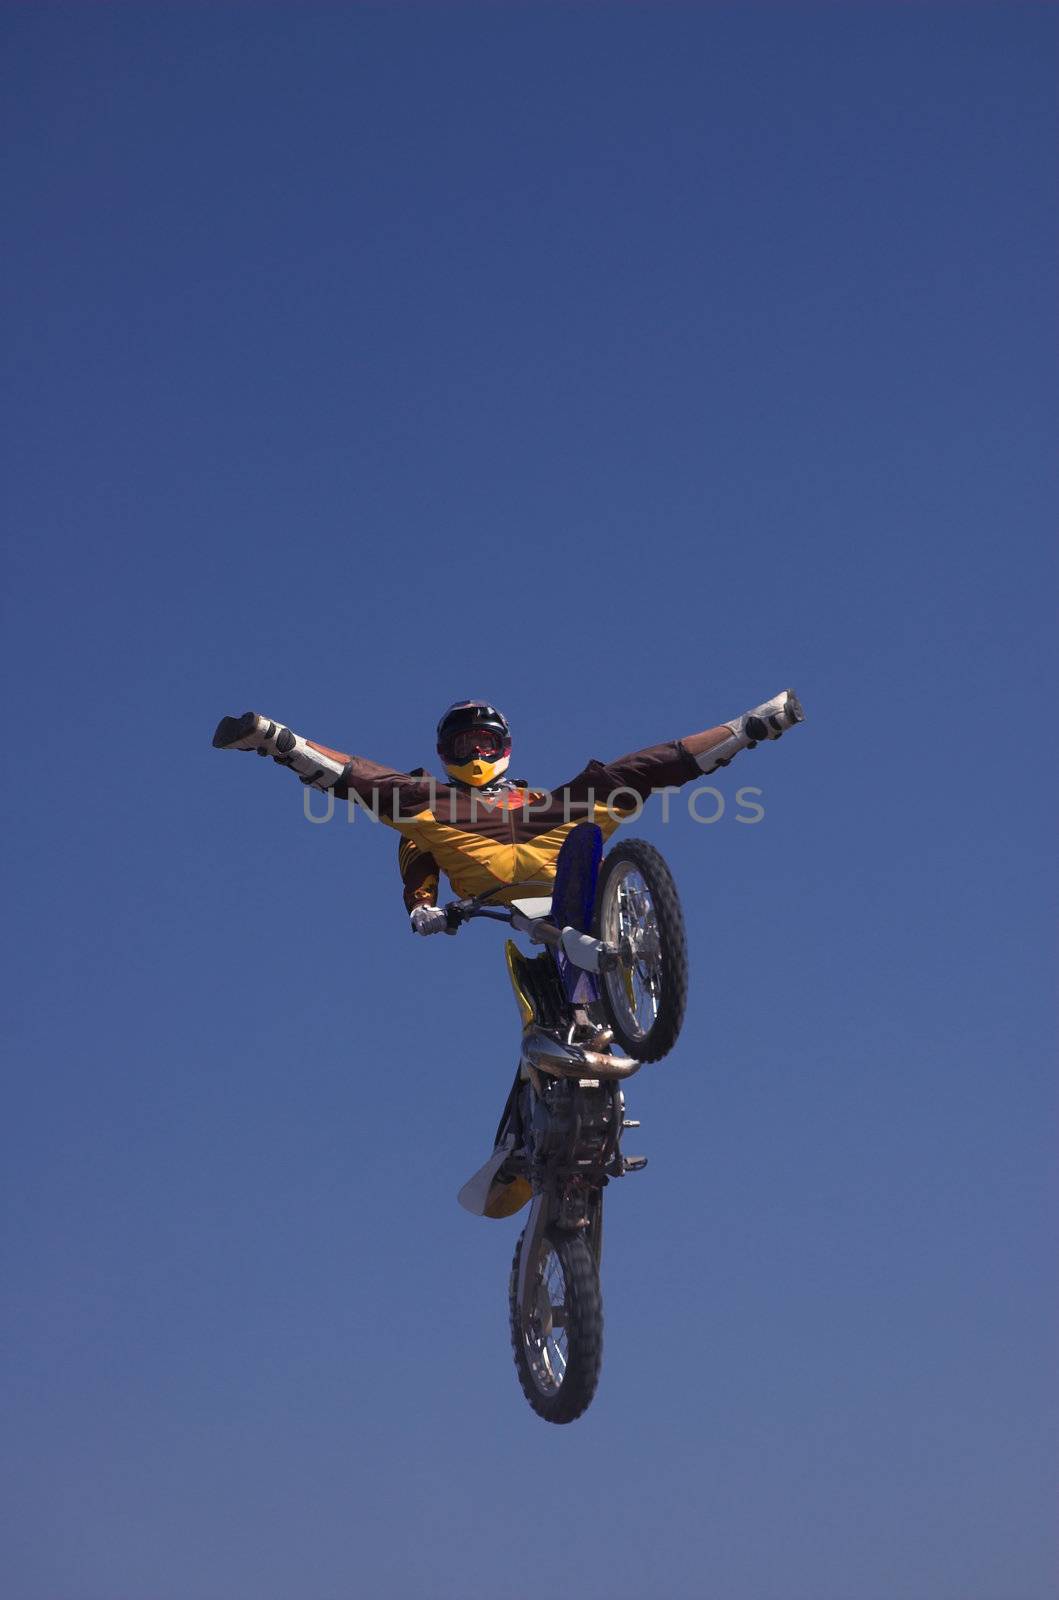 Moto X Freestyle rider with legs open trick high in sky